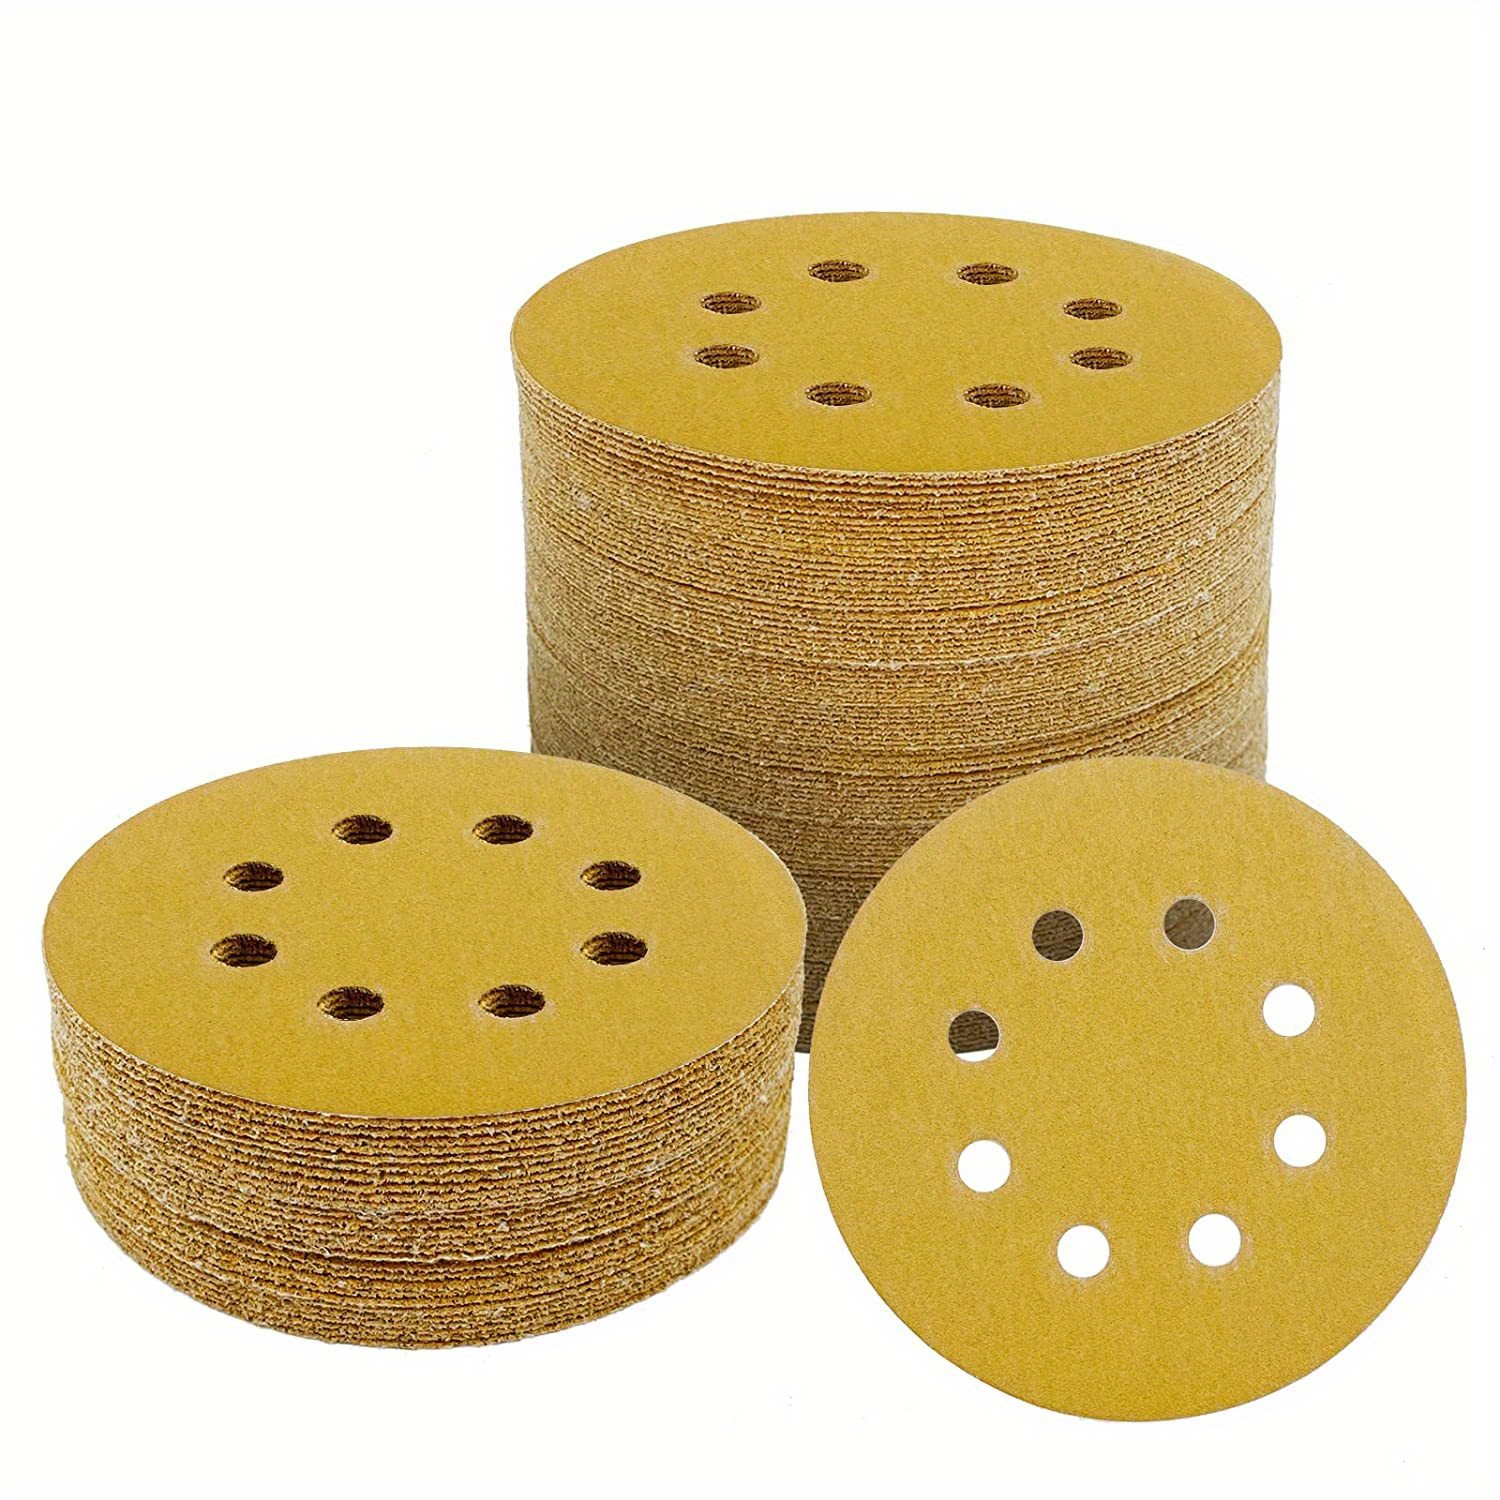 ABRASIVES - Sanding - Sanding Discs - 2 Hook and Loop Discs - The  Woodturning Store